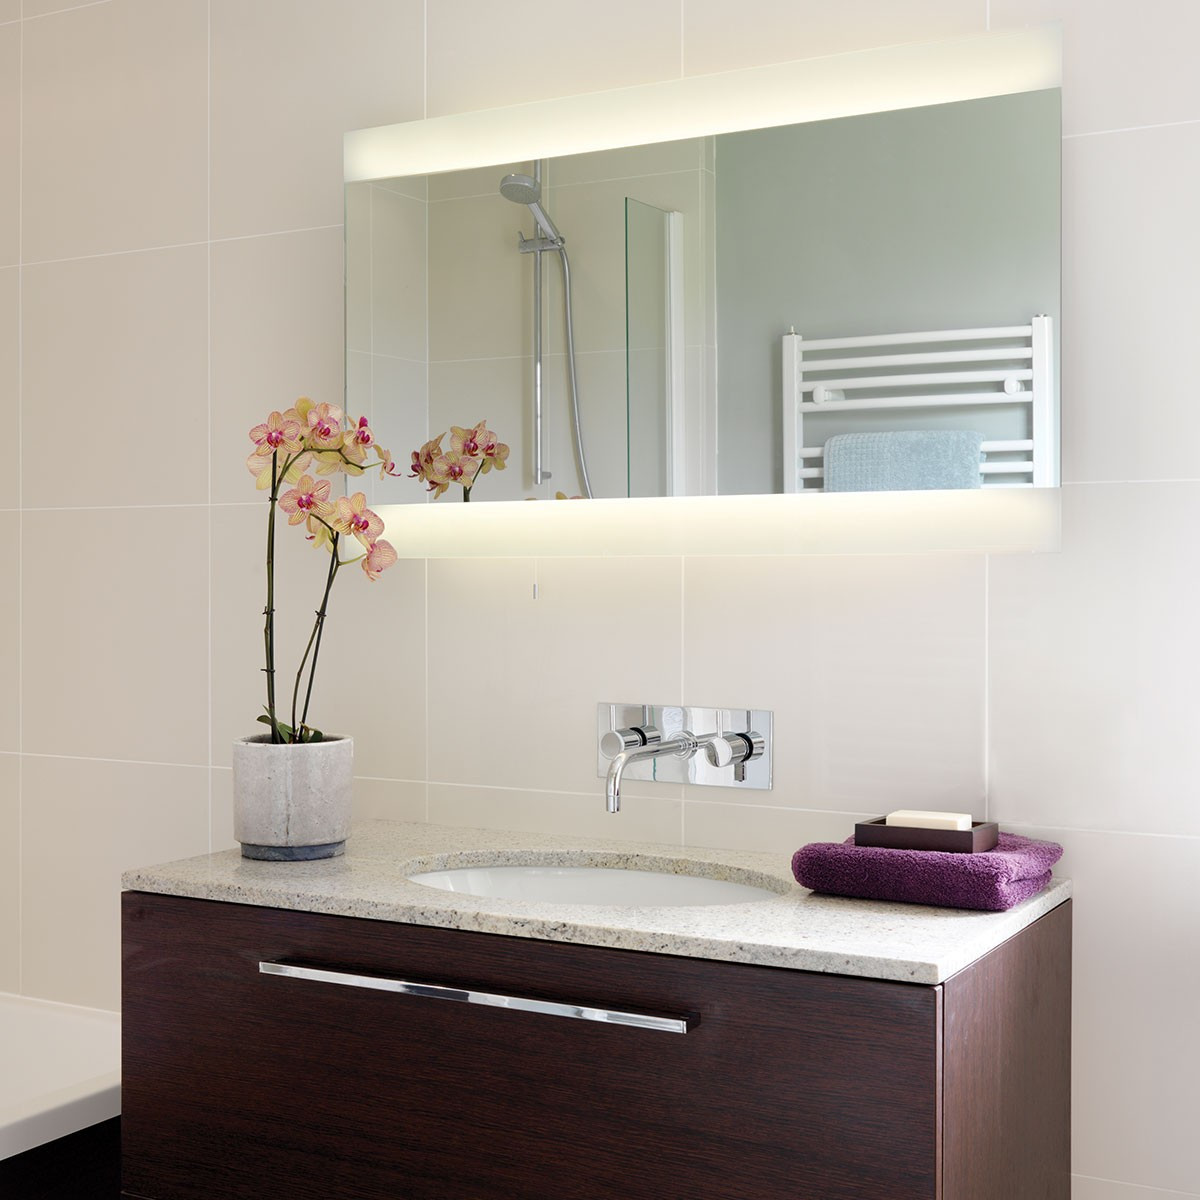 Bathroom Mirrors With Lights
 Astro Fuji Wide 950 Bathroom Mirror Light at UK Electrical